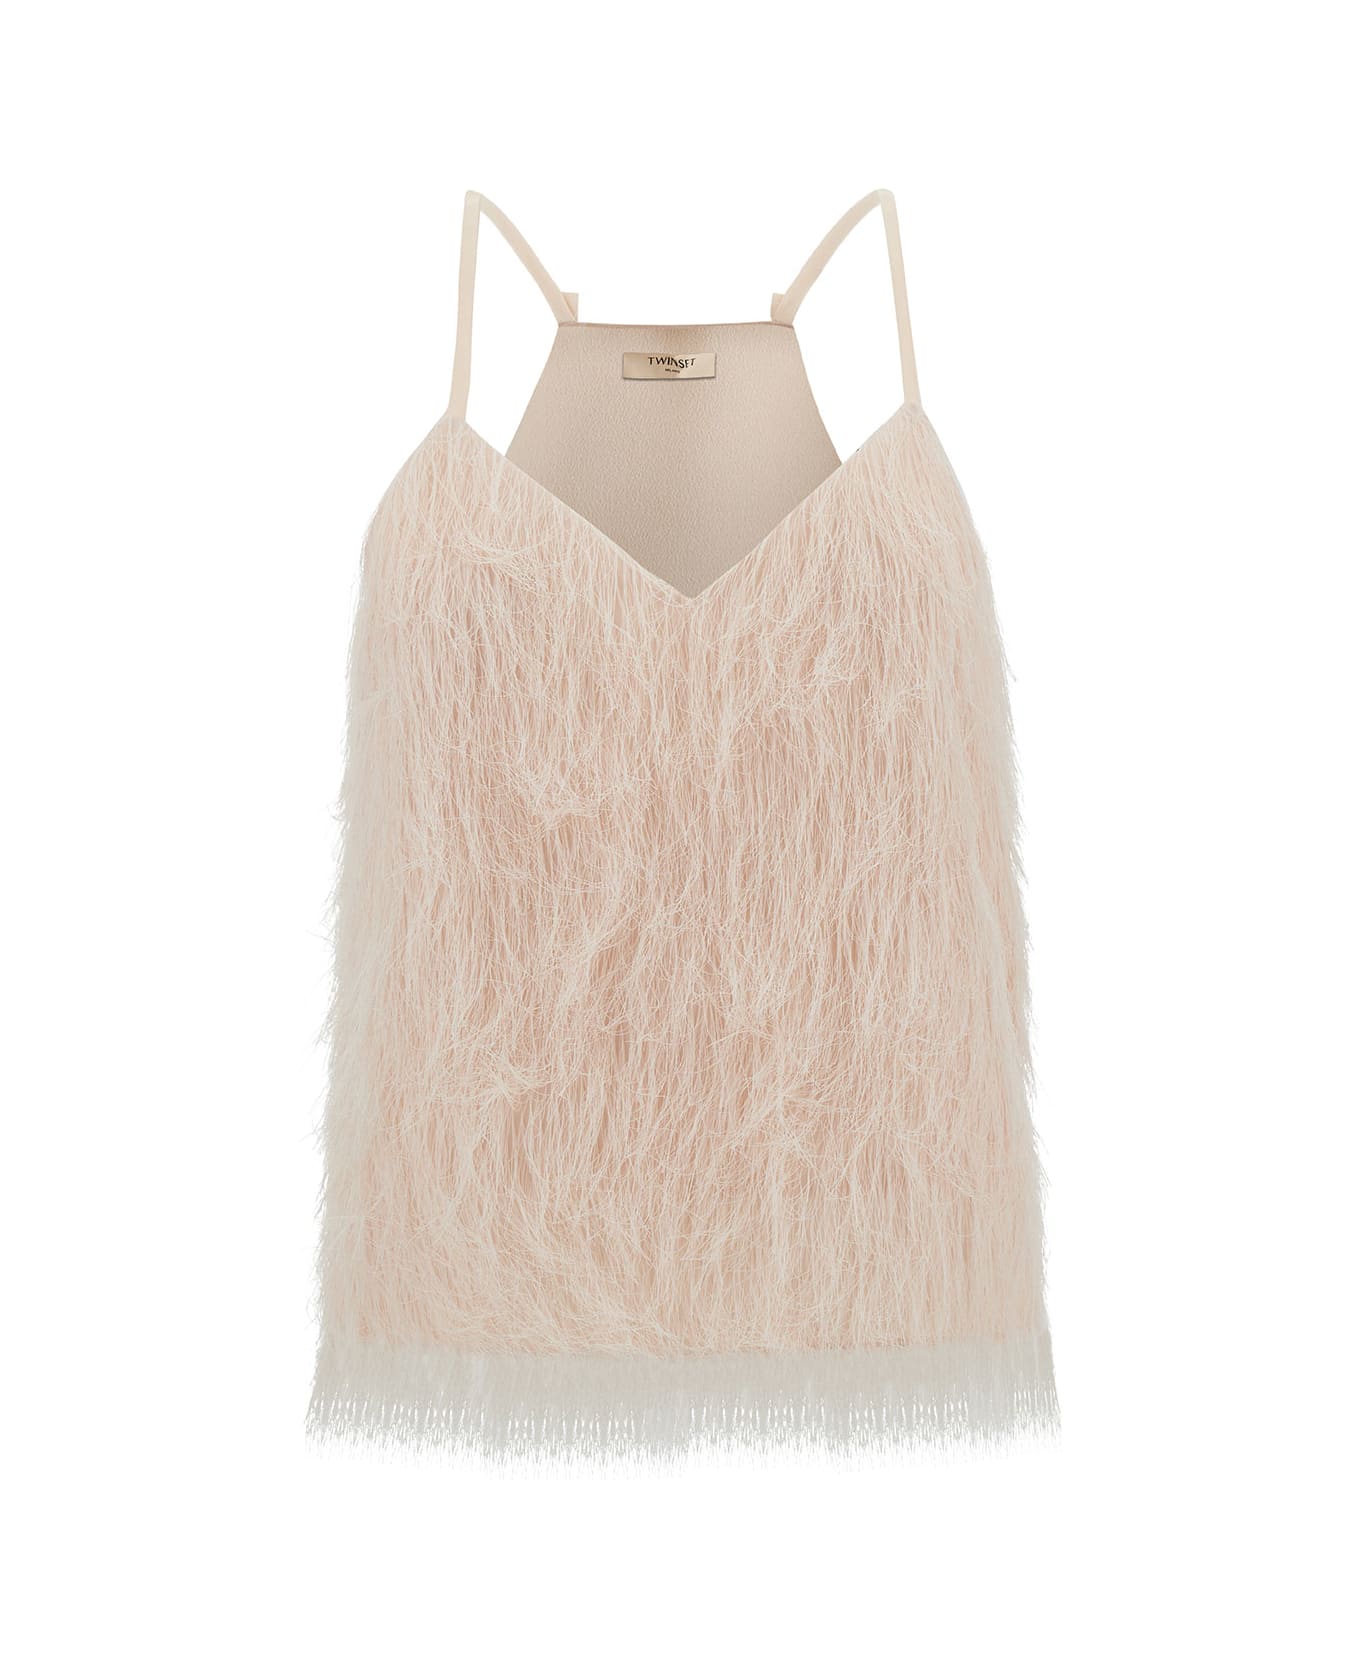 TwinSet Light Pink Top With All-over Feathers In Tech Fabric Woman - LIGHT PINK